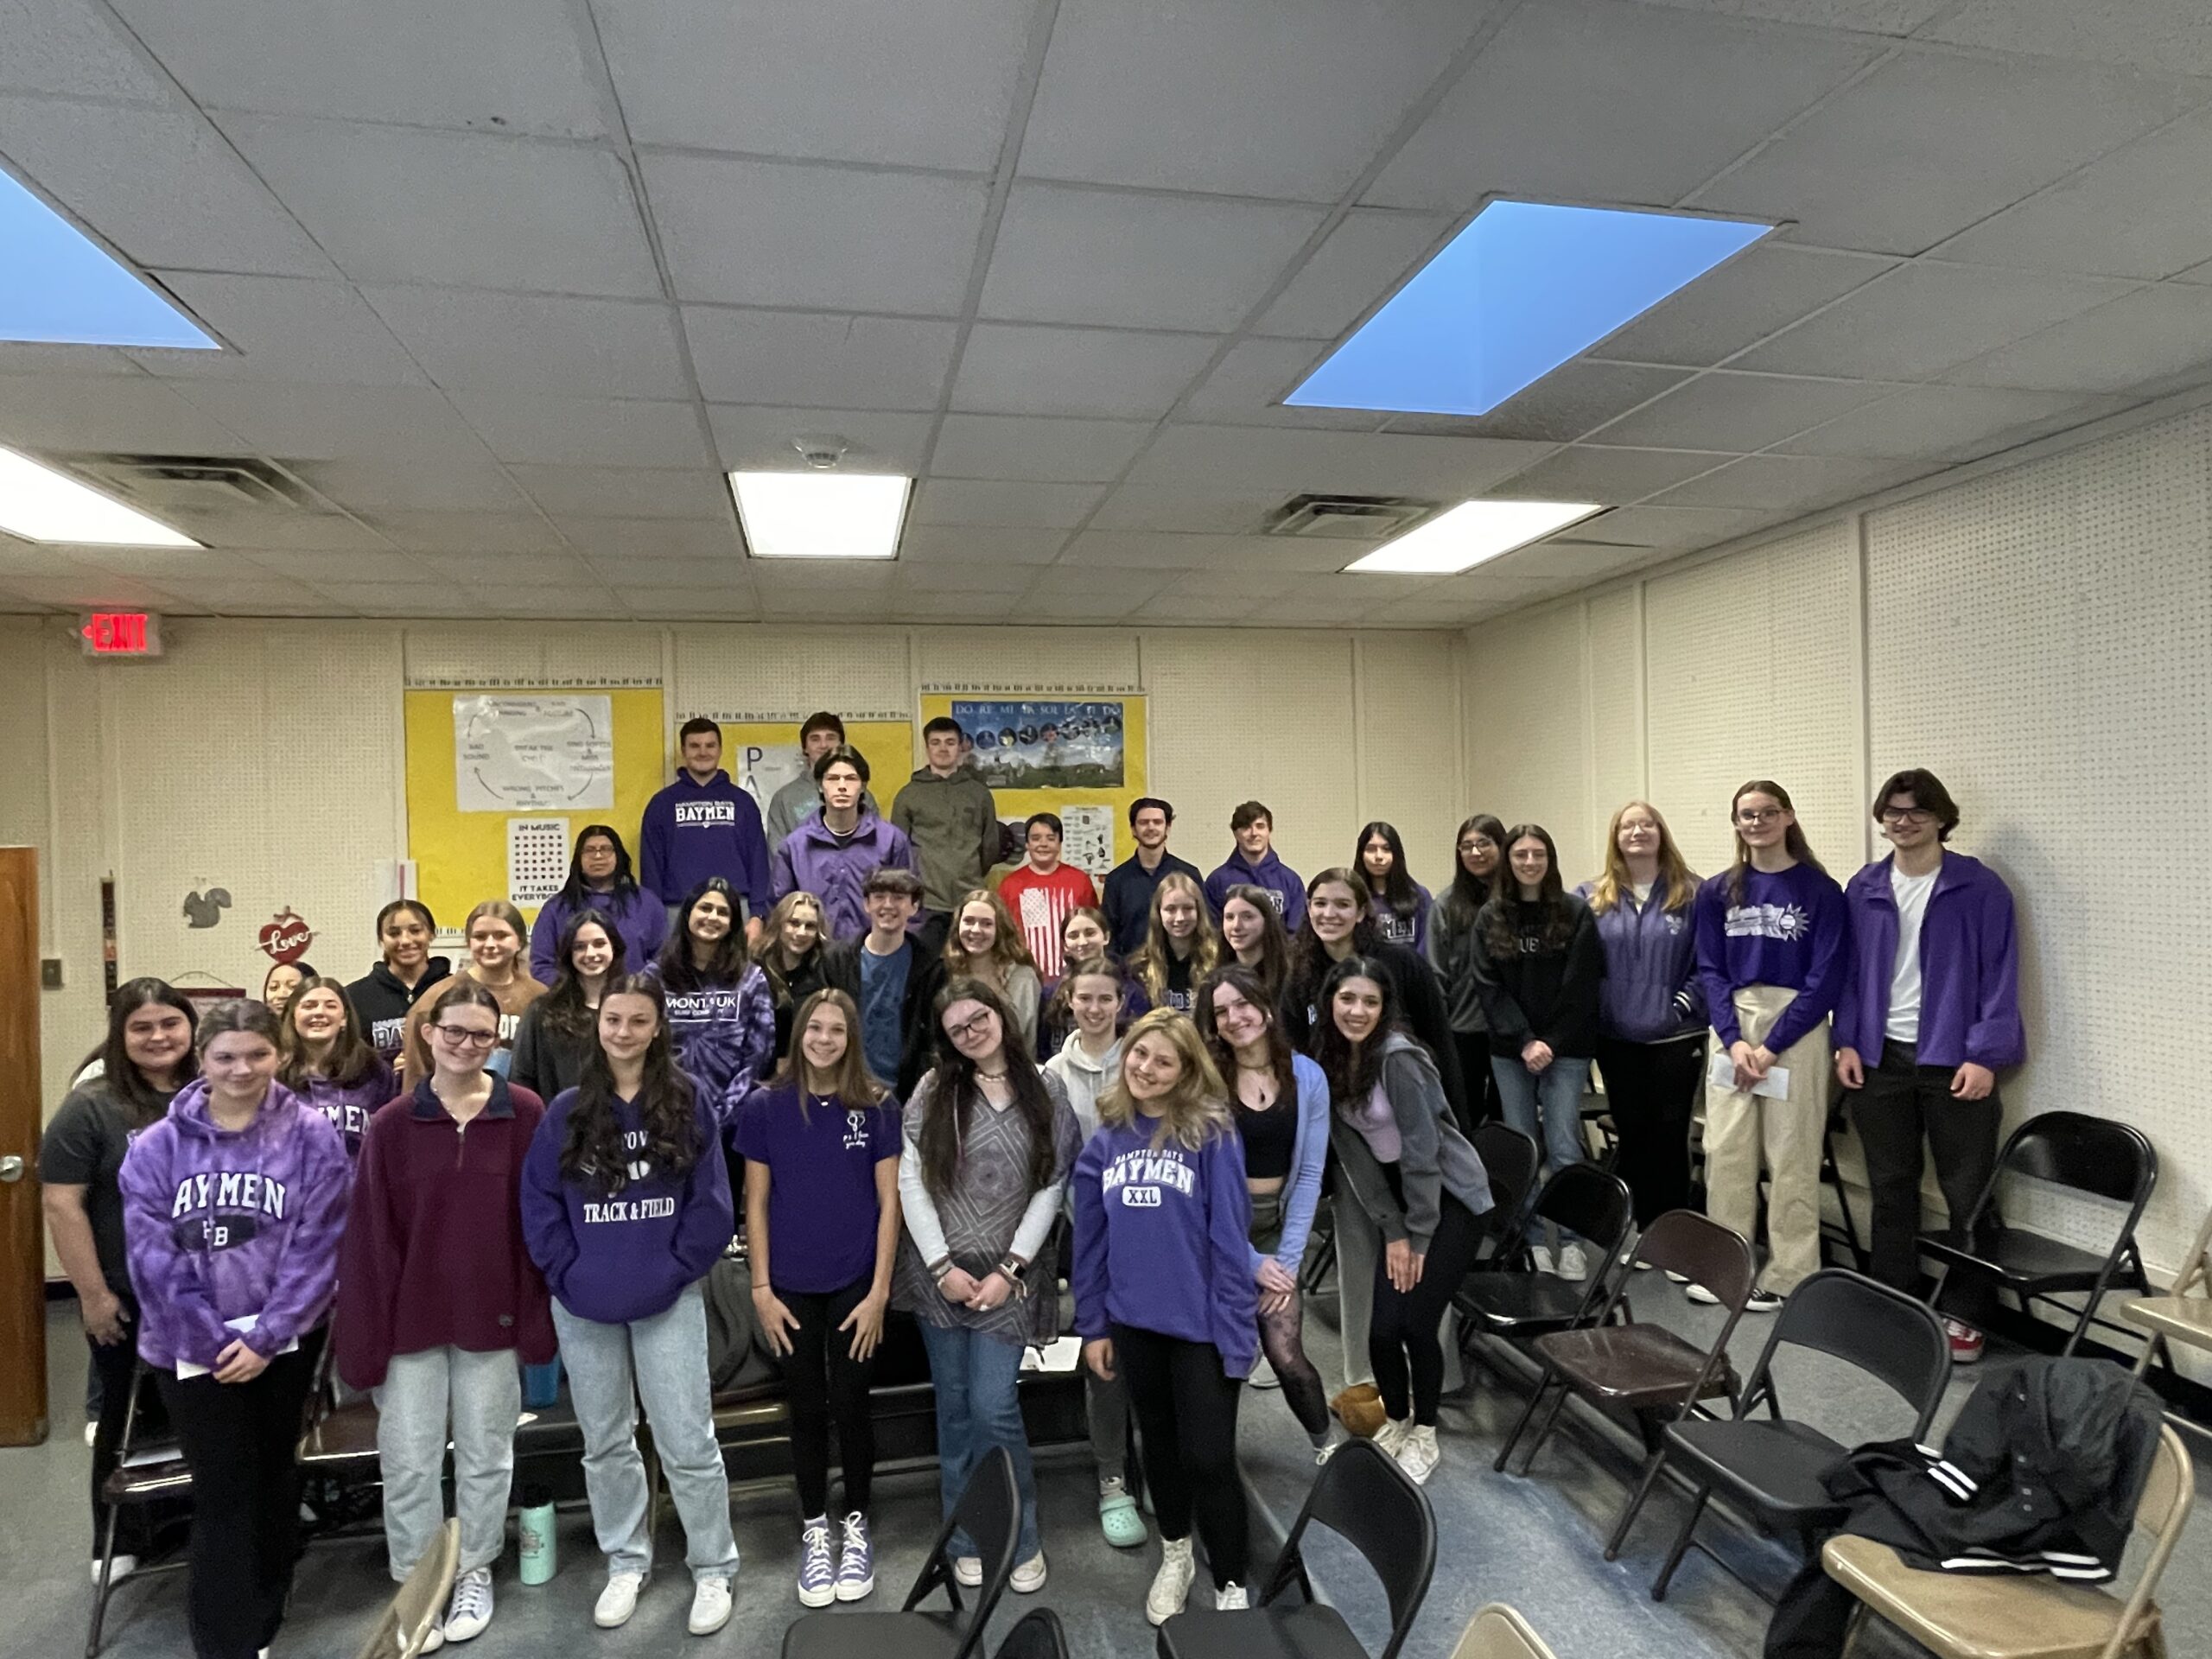 To raise awareness for mental health and suicide prevention, the members of the Hampton Bays High School Tri-M Music Honor Society promoted P.S. I Love You Day on February 10. They wrote notes of encouragement and placed them on the lockers of their peers and distributed hundreds of letters that students had written to one another as a reminder that they are loved and cared about. They also wore purple to bring awareness to the cause. COURTESY HAMPTON BAYS SCHOOL DISTRICT